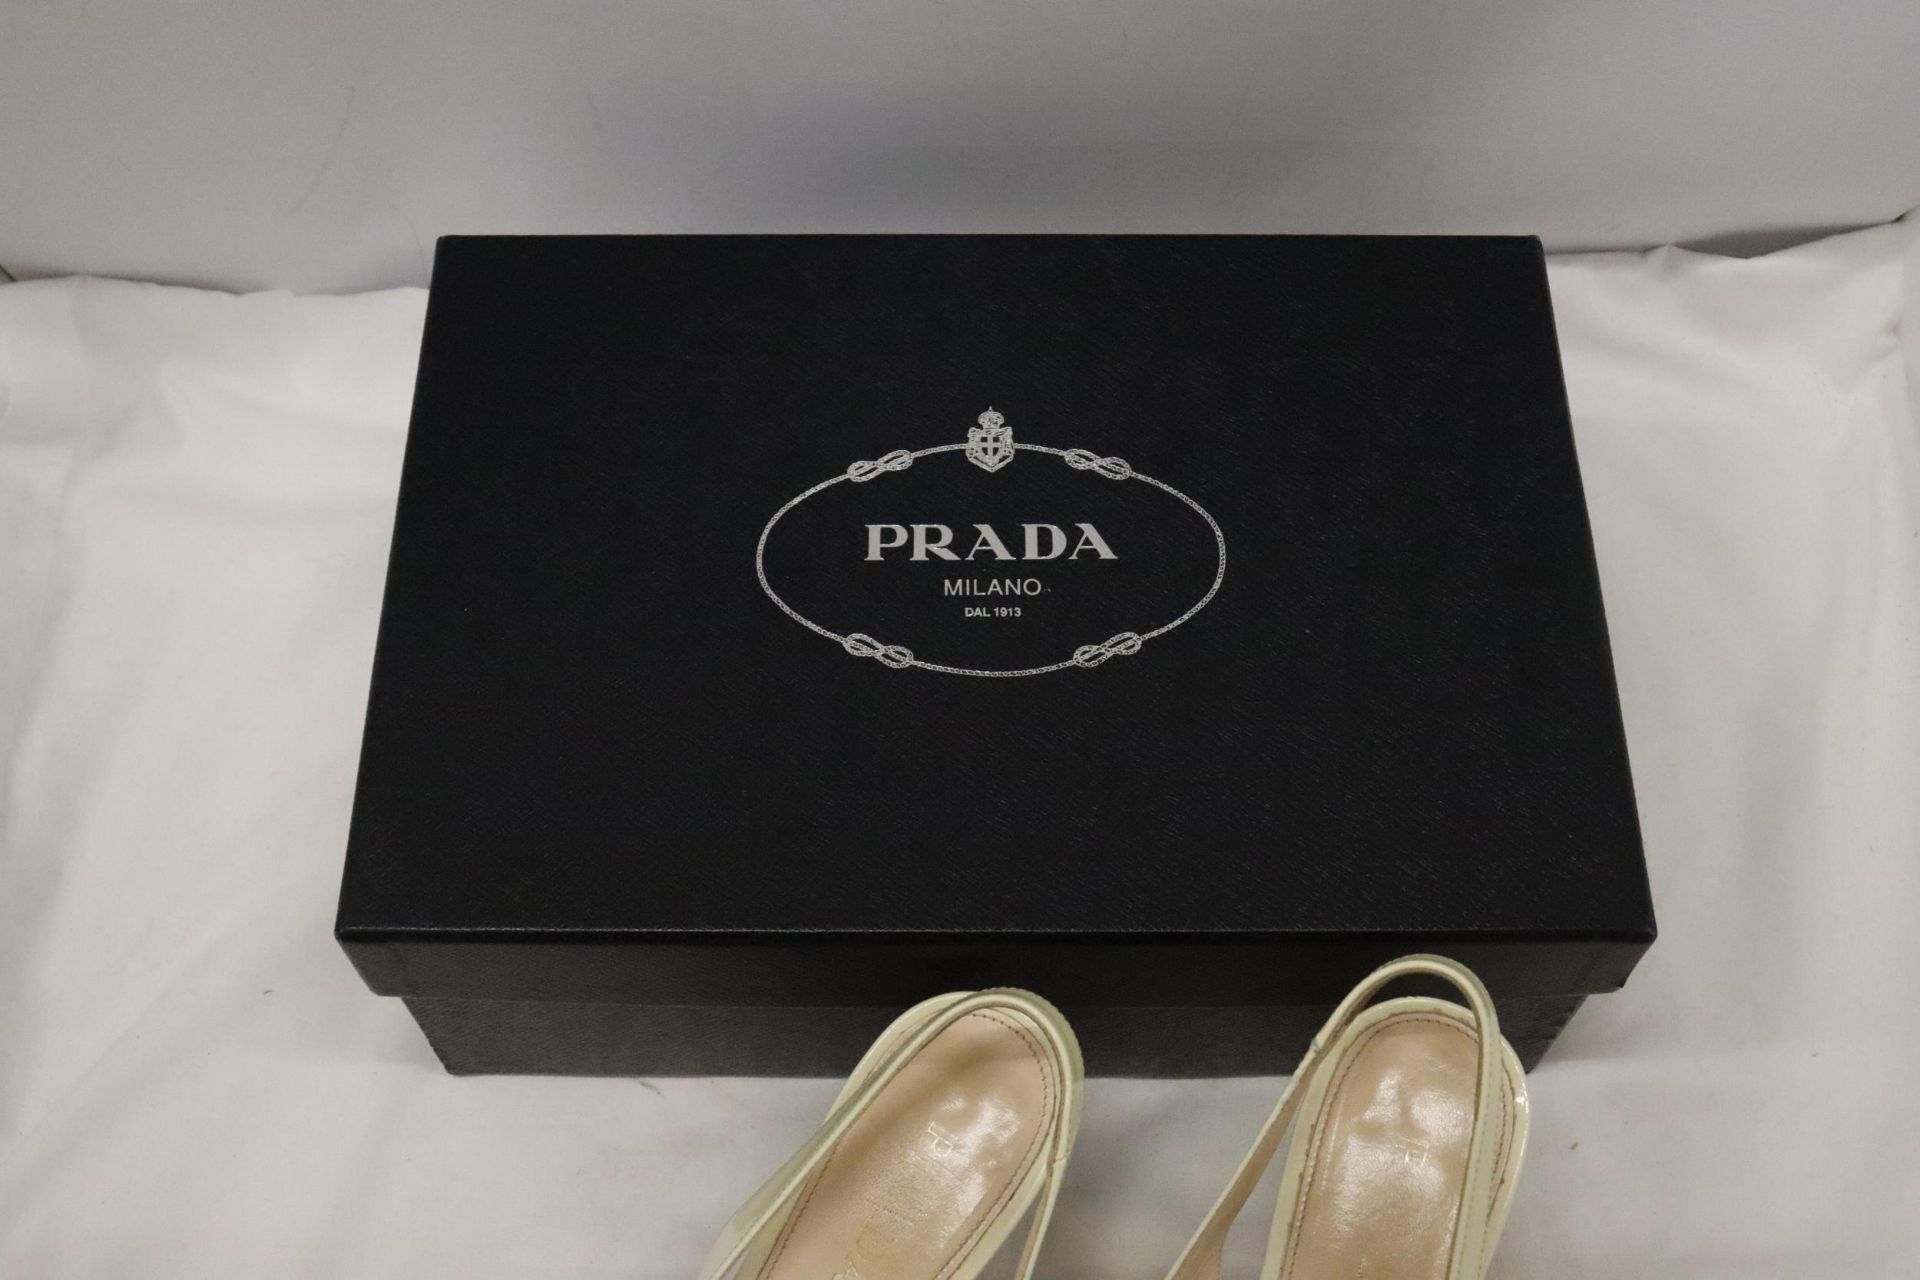 A PAIR OF CREAM HIGH HEELED SHOES, MARKED WITH A GOLD COLOURED 'PRADA' TO THE UNDERSIDE, IN A BOX - Image 2 of 7